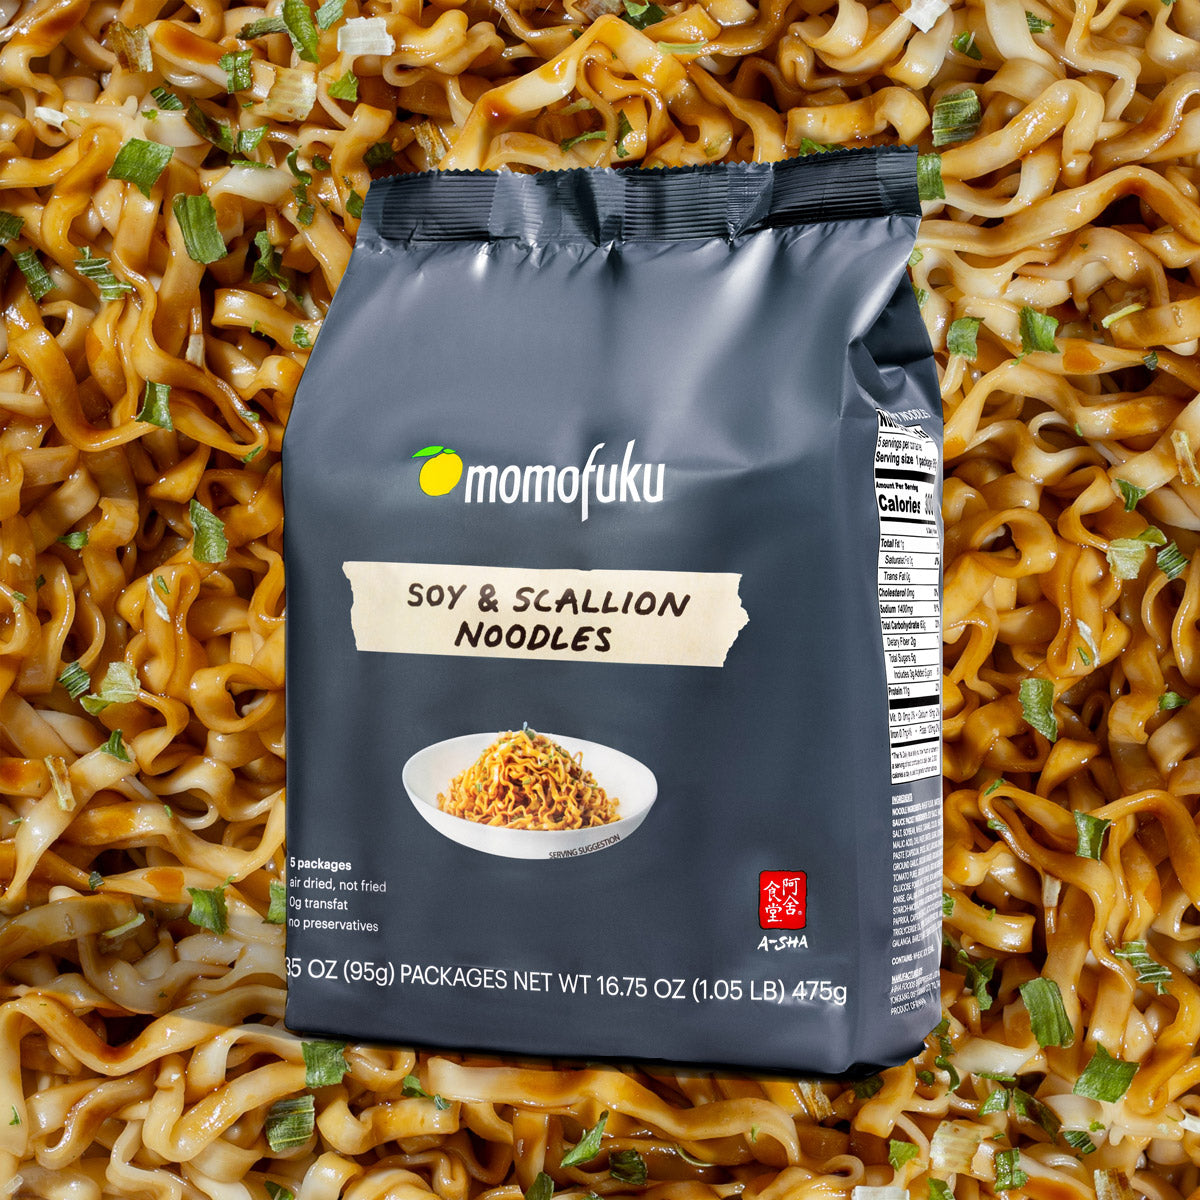 5 Pack of Soy & Scallion Noodles